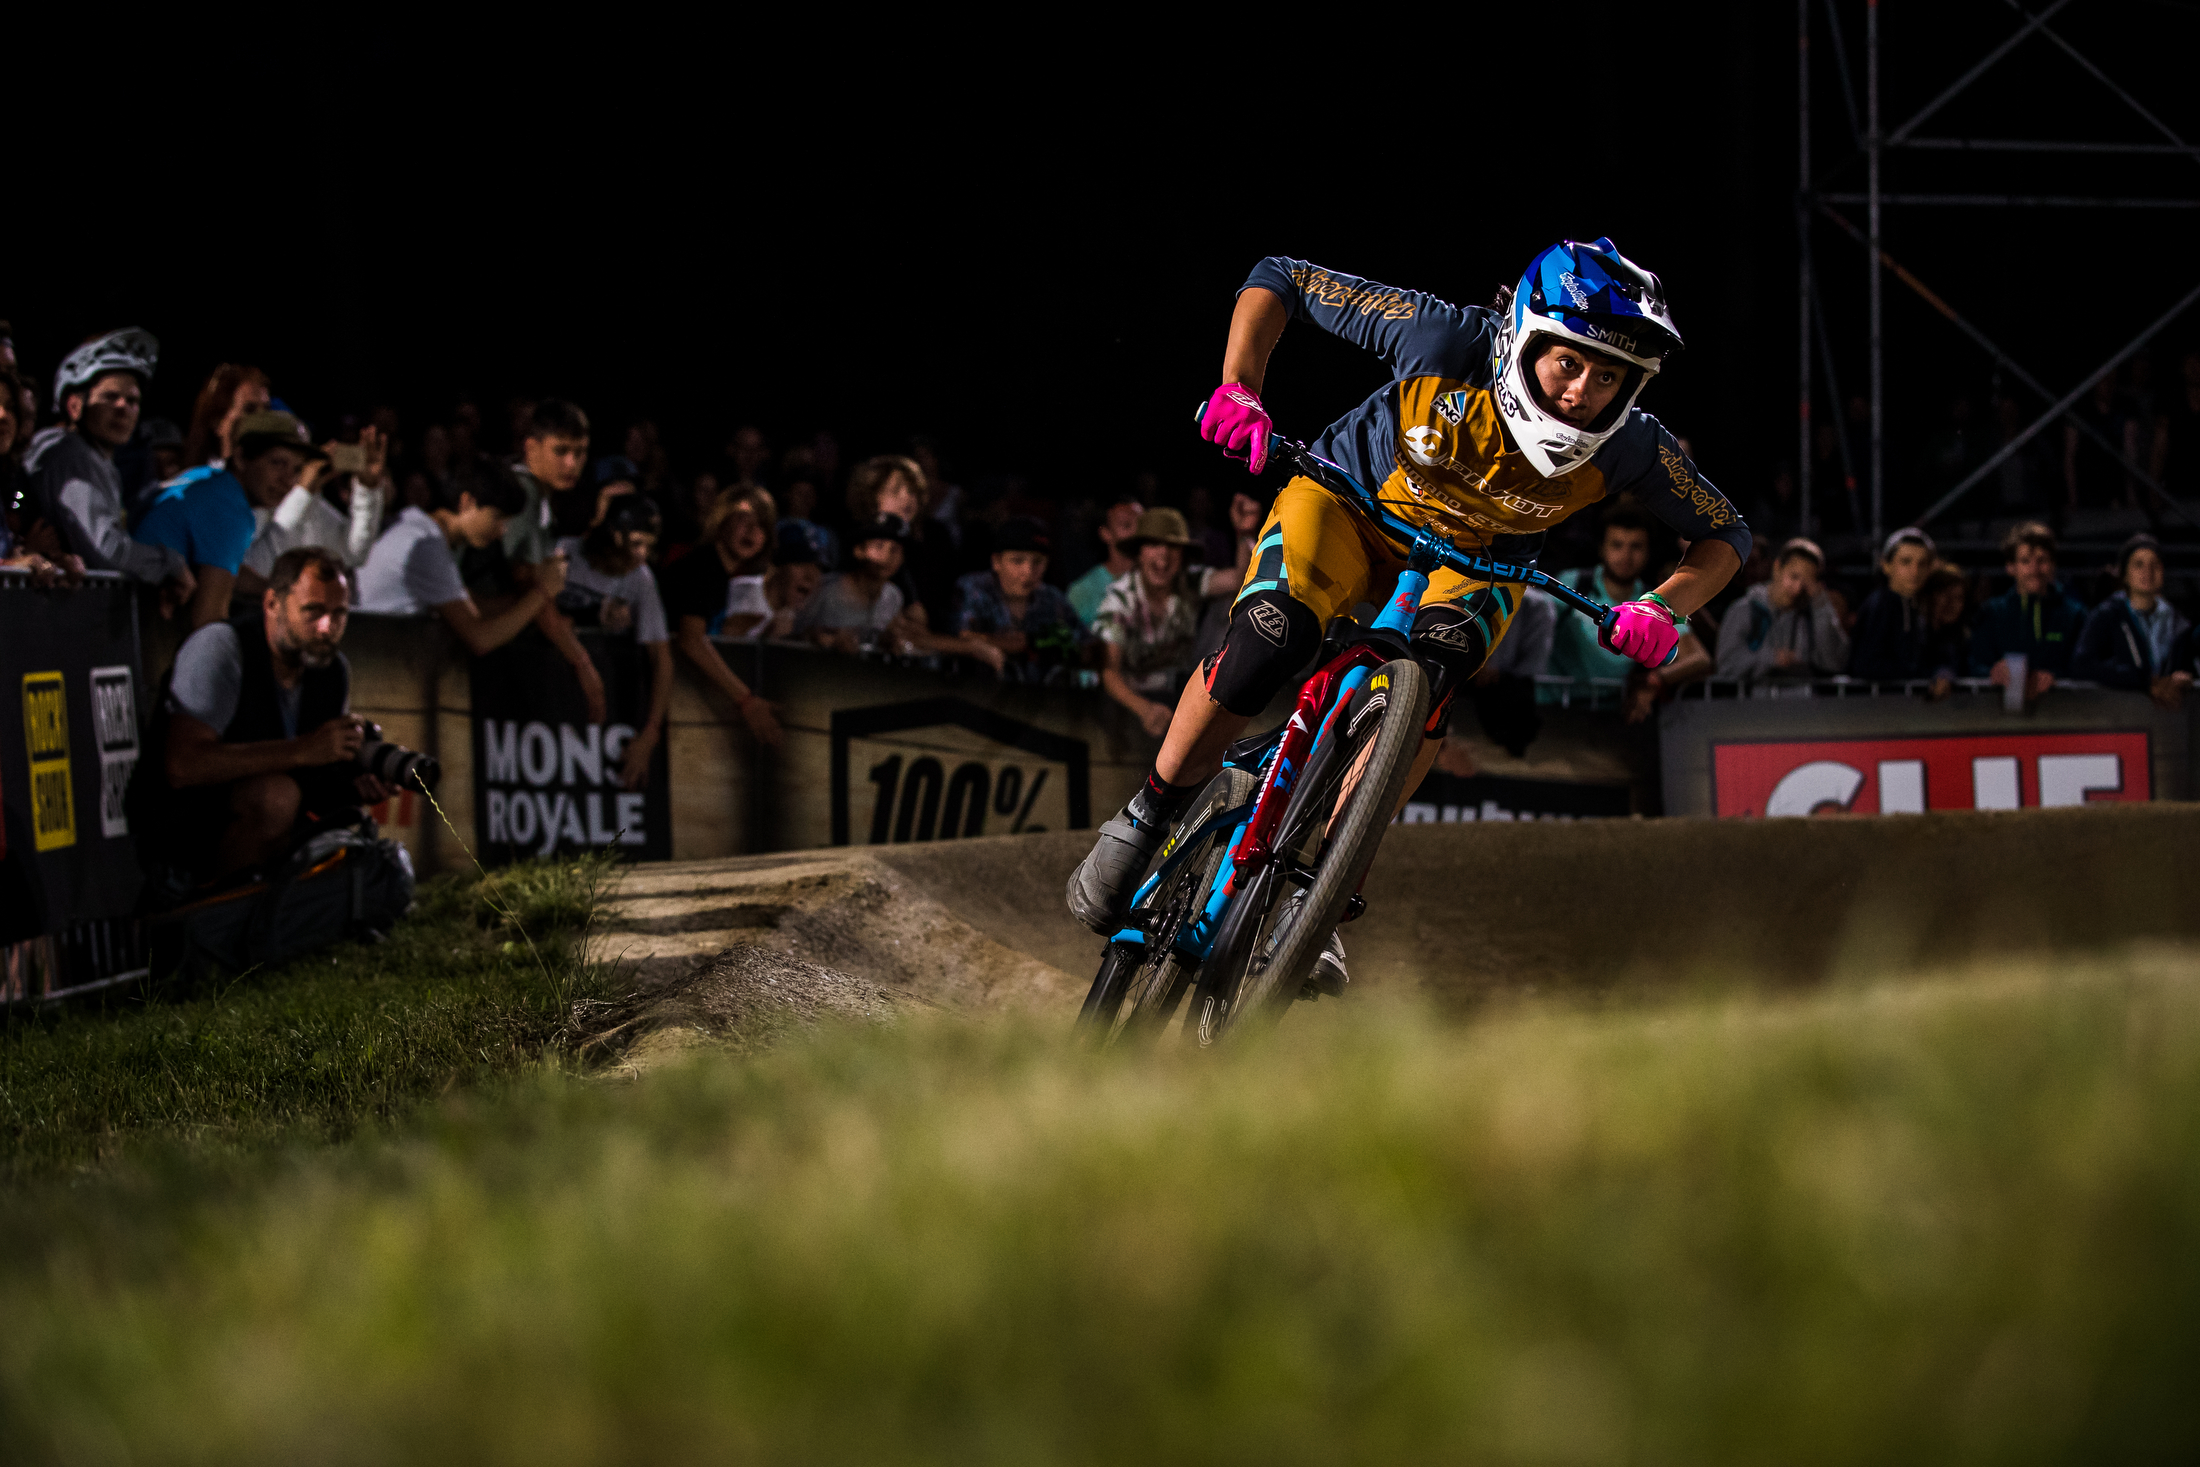 Kialani Hines looking quick on her way to victory in the pumptrack competition. Crankworx Innsbruck 2019.